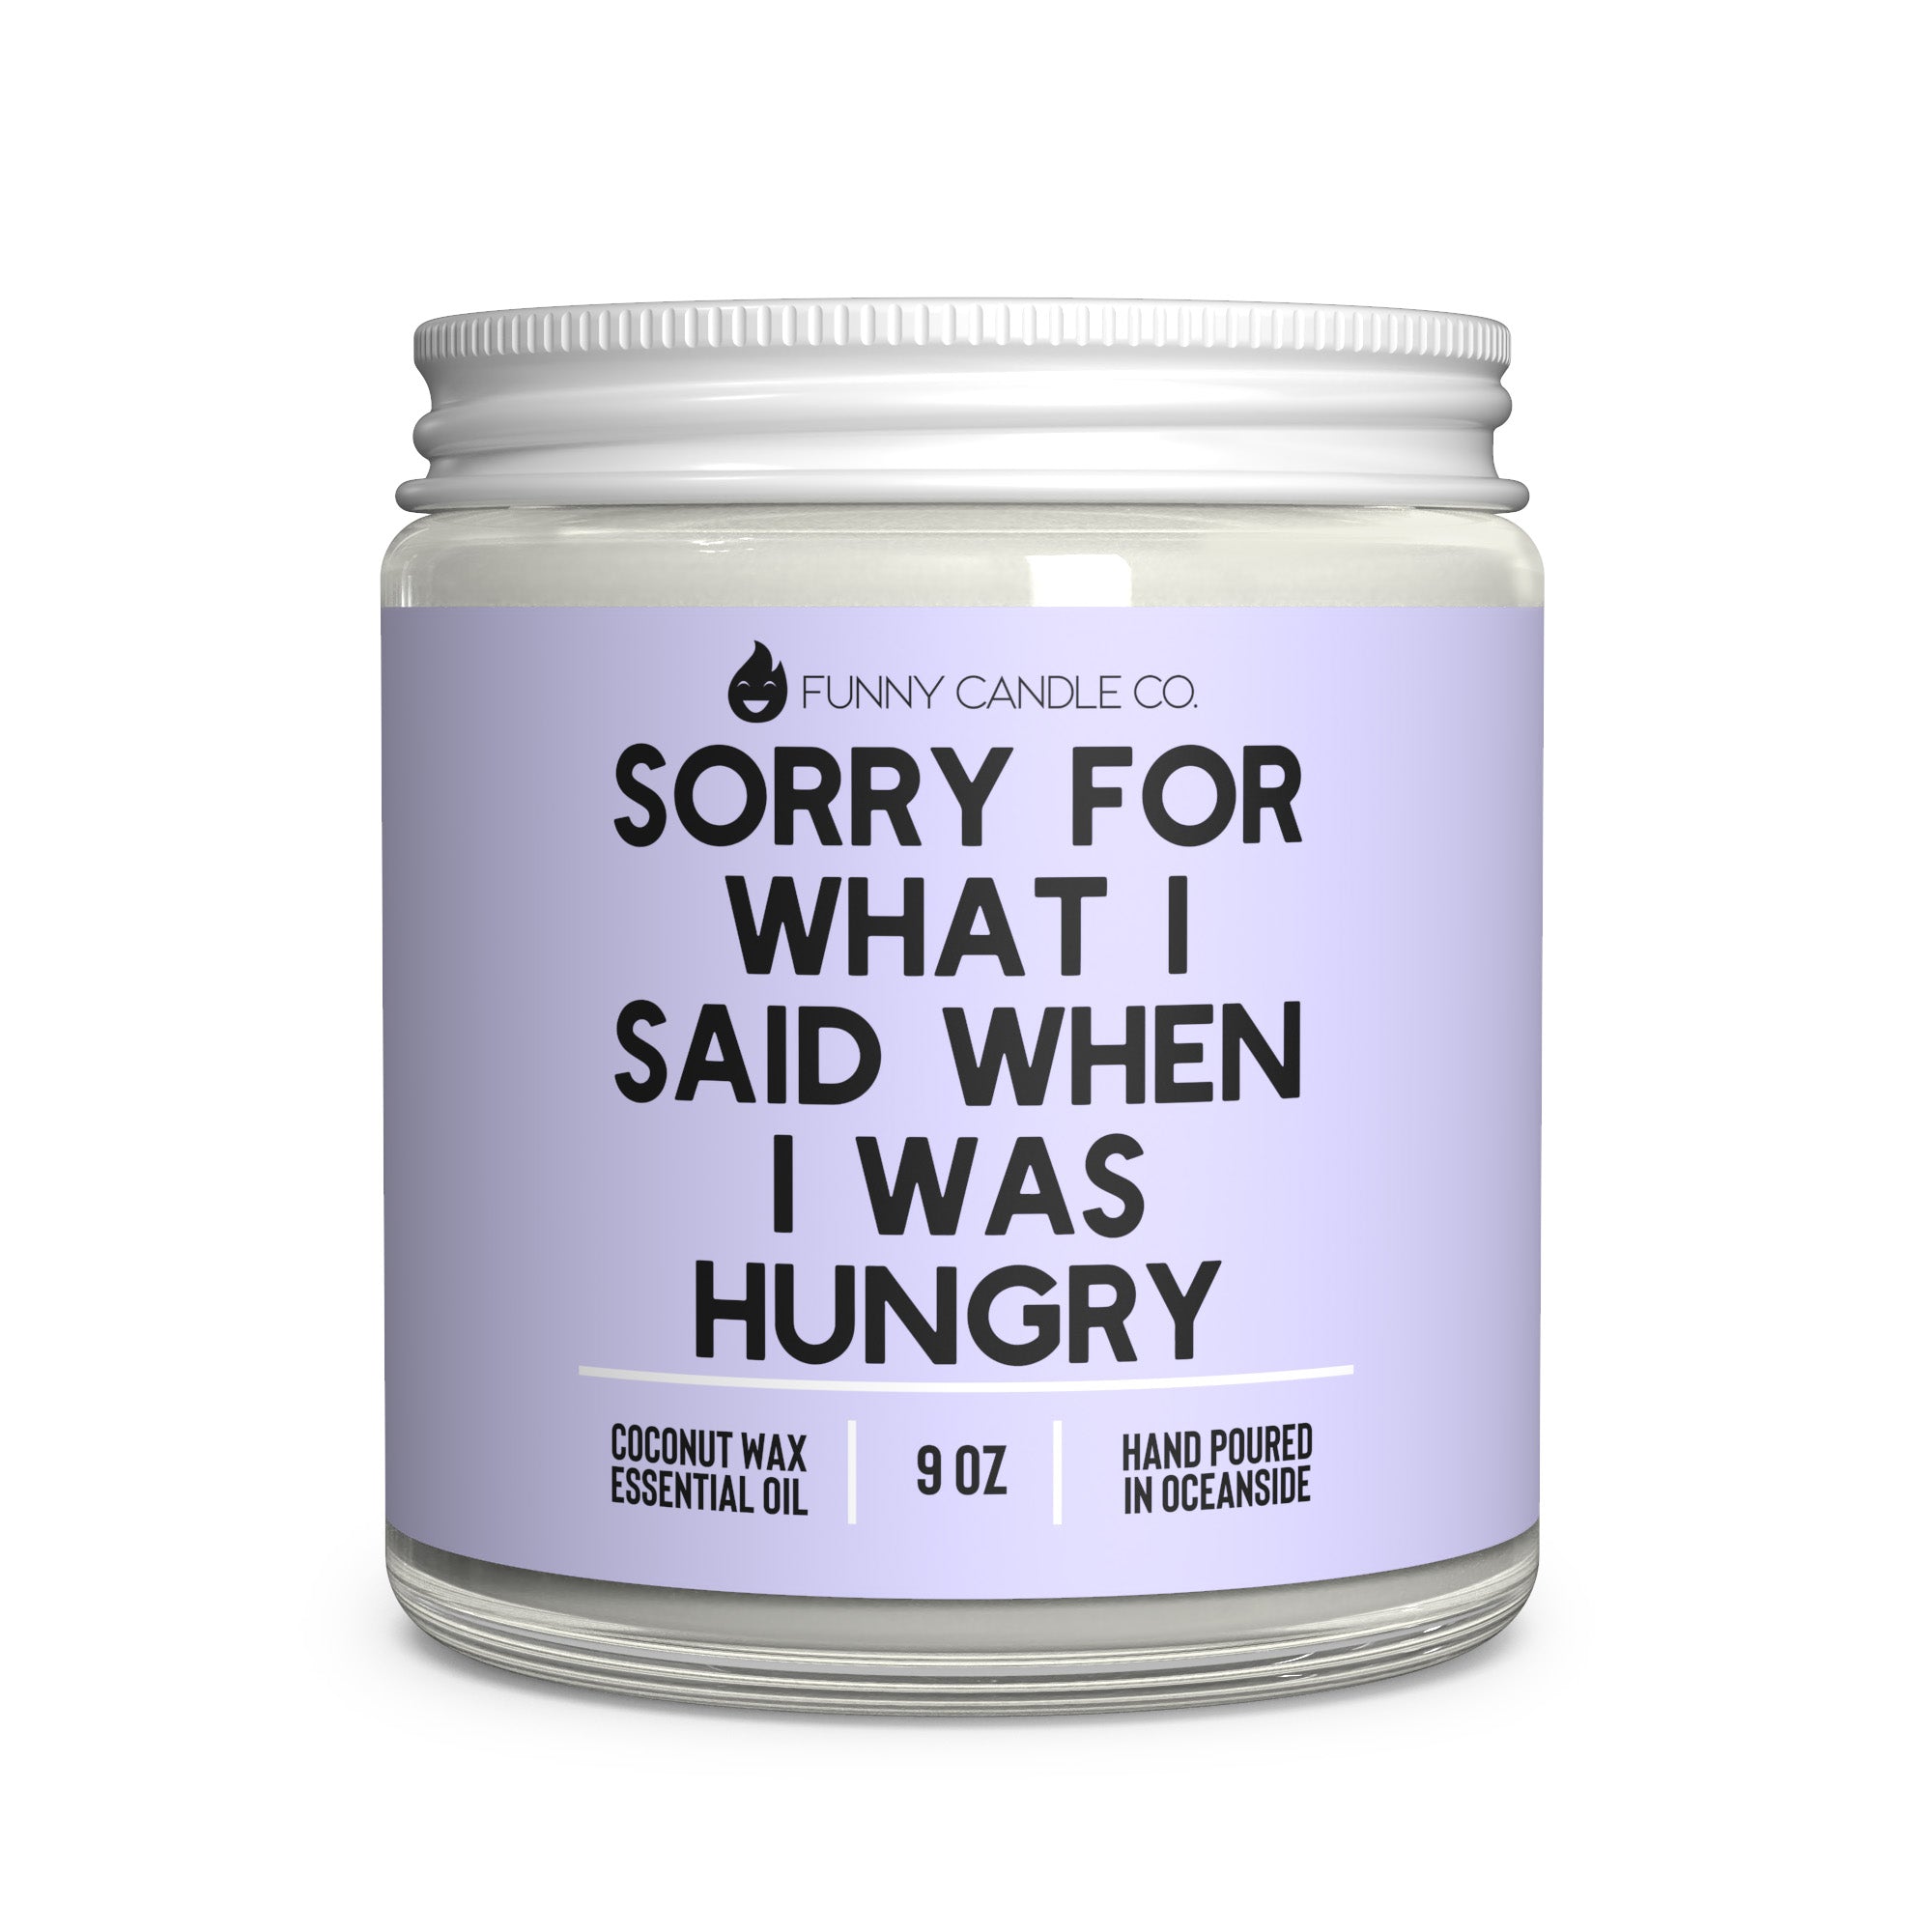 Sorry for what I said when I was hungry - Candle